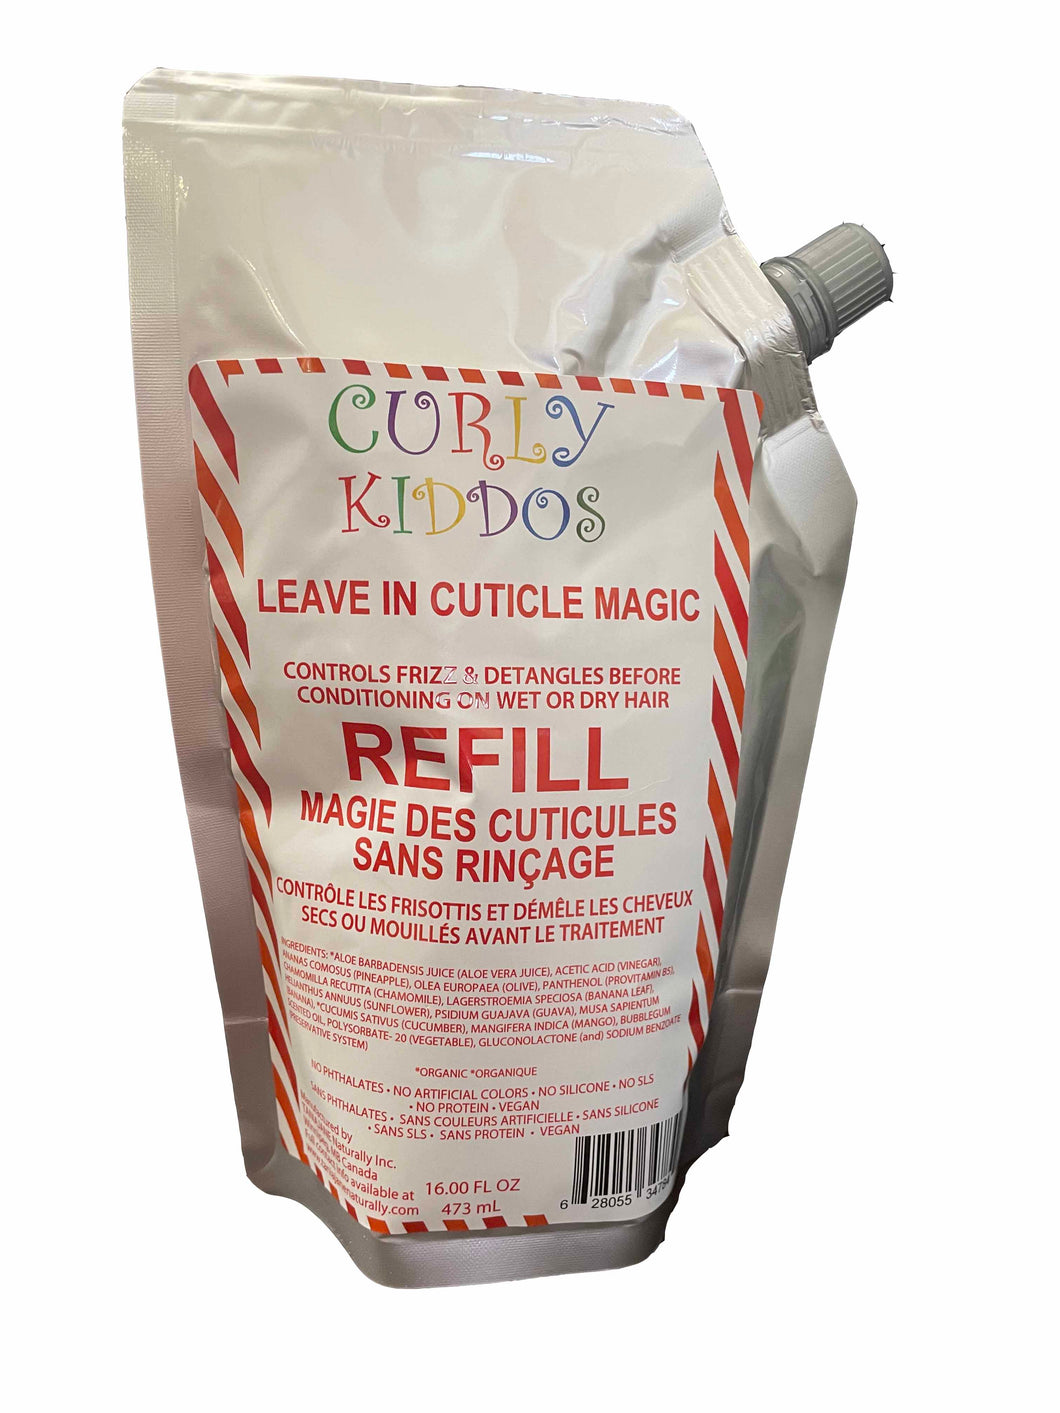 REFILL - Curly Kiddos Leave In Cuticle Magic